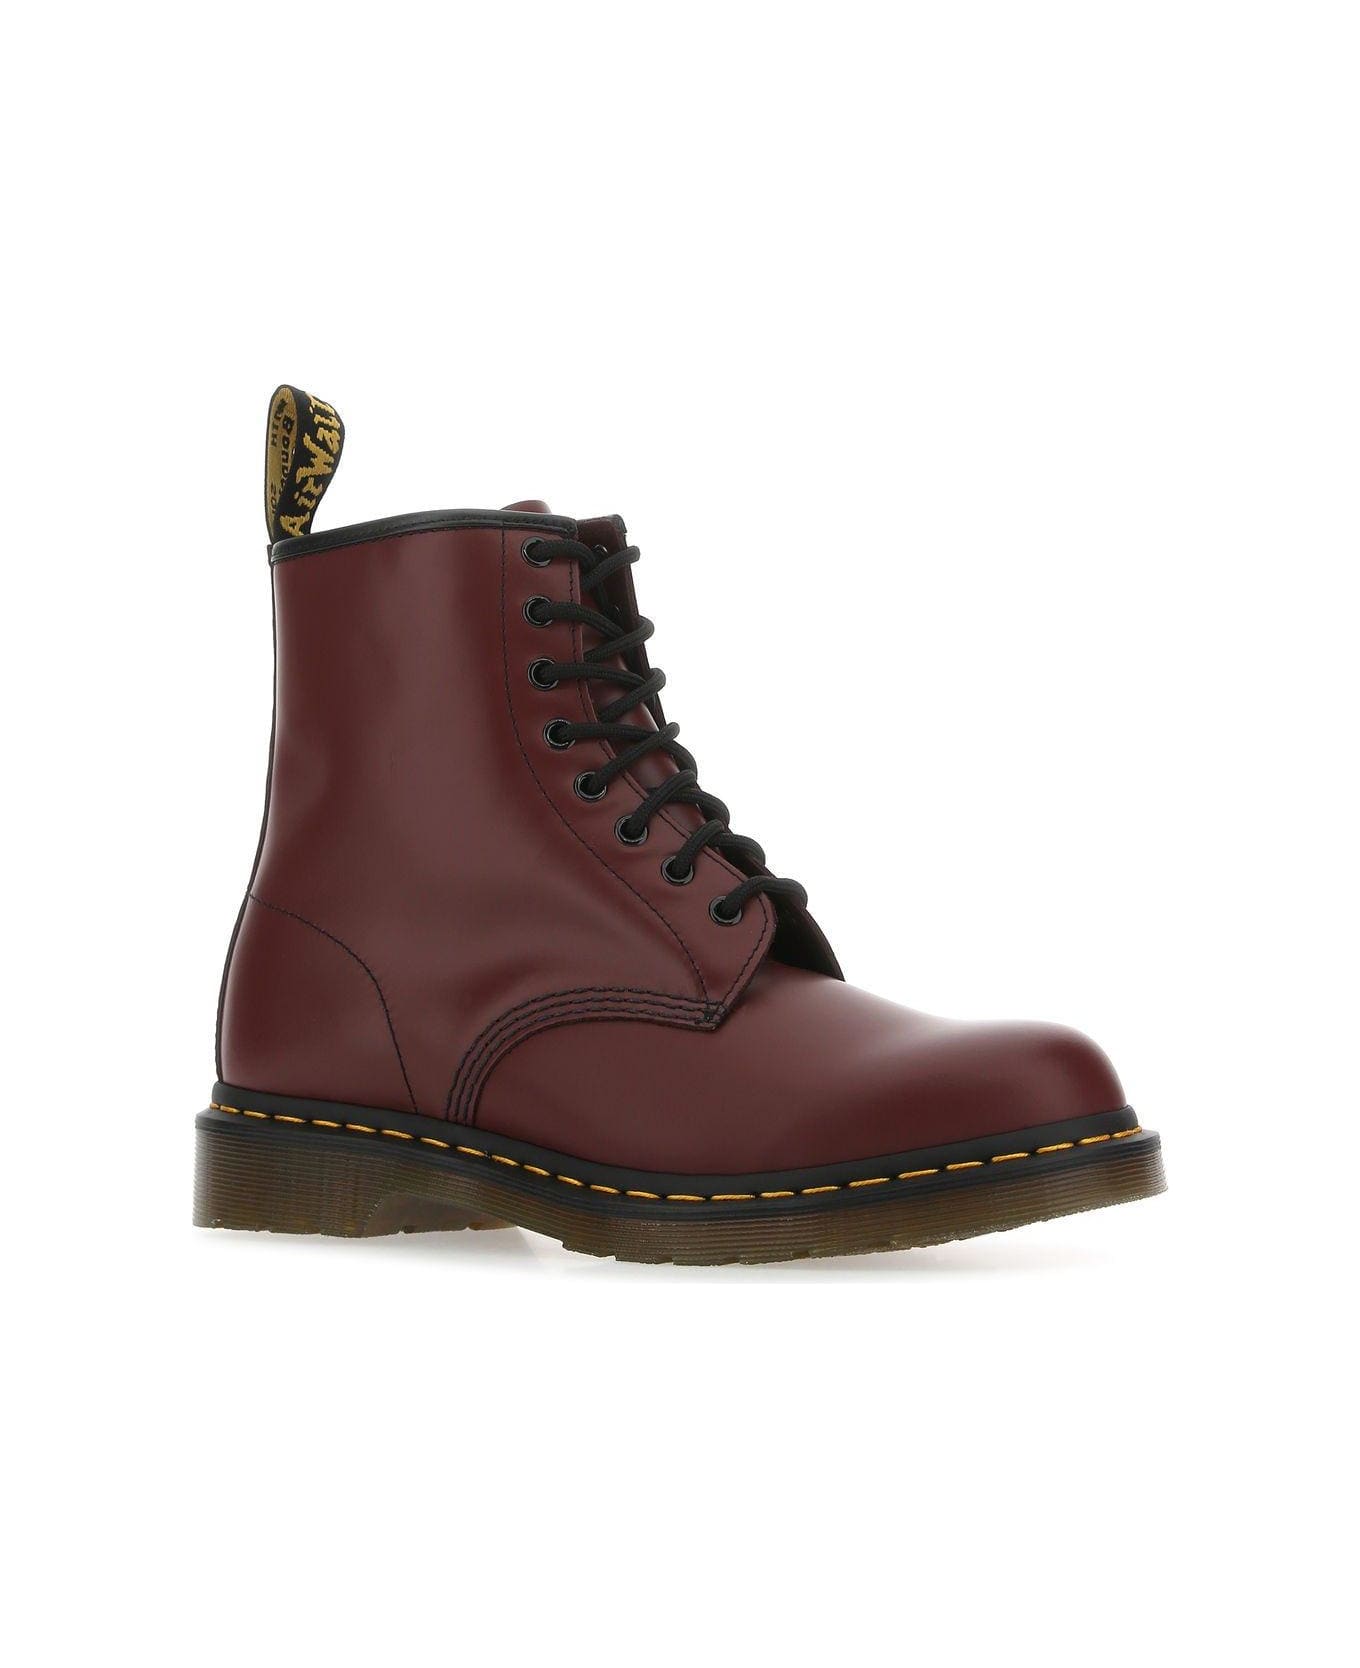 Dr. Martens Burgundy Leather 1460 Ankle Boots